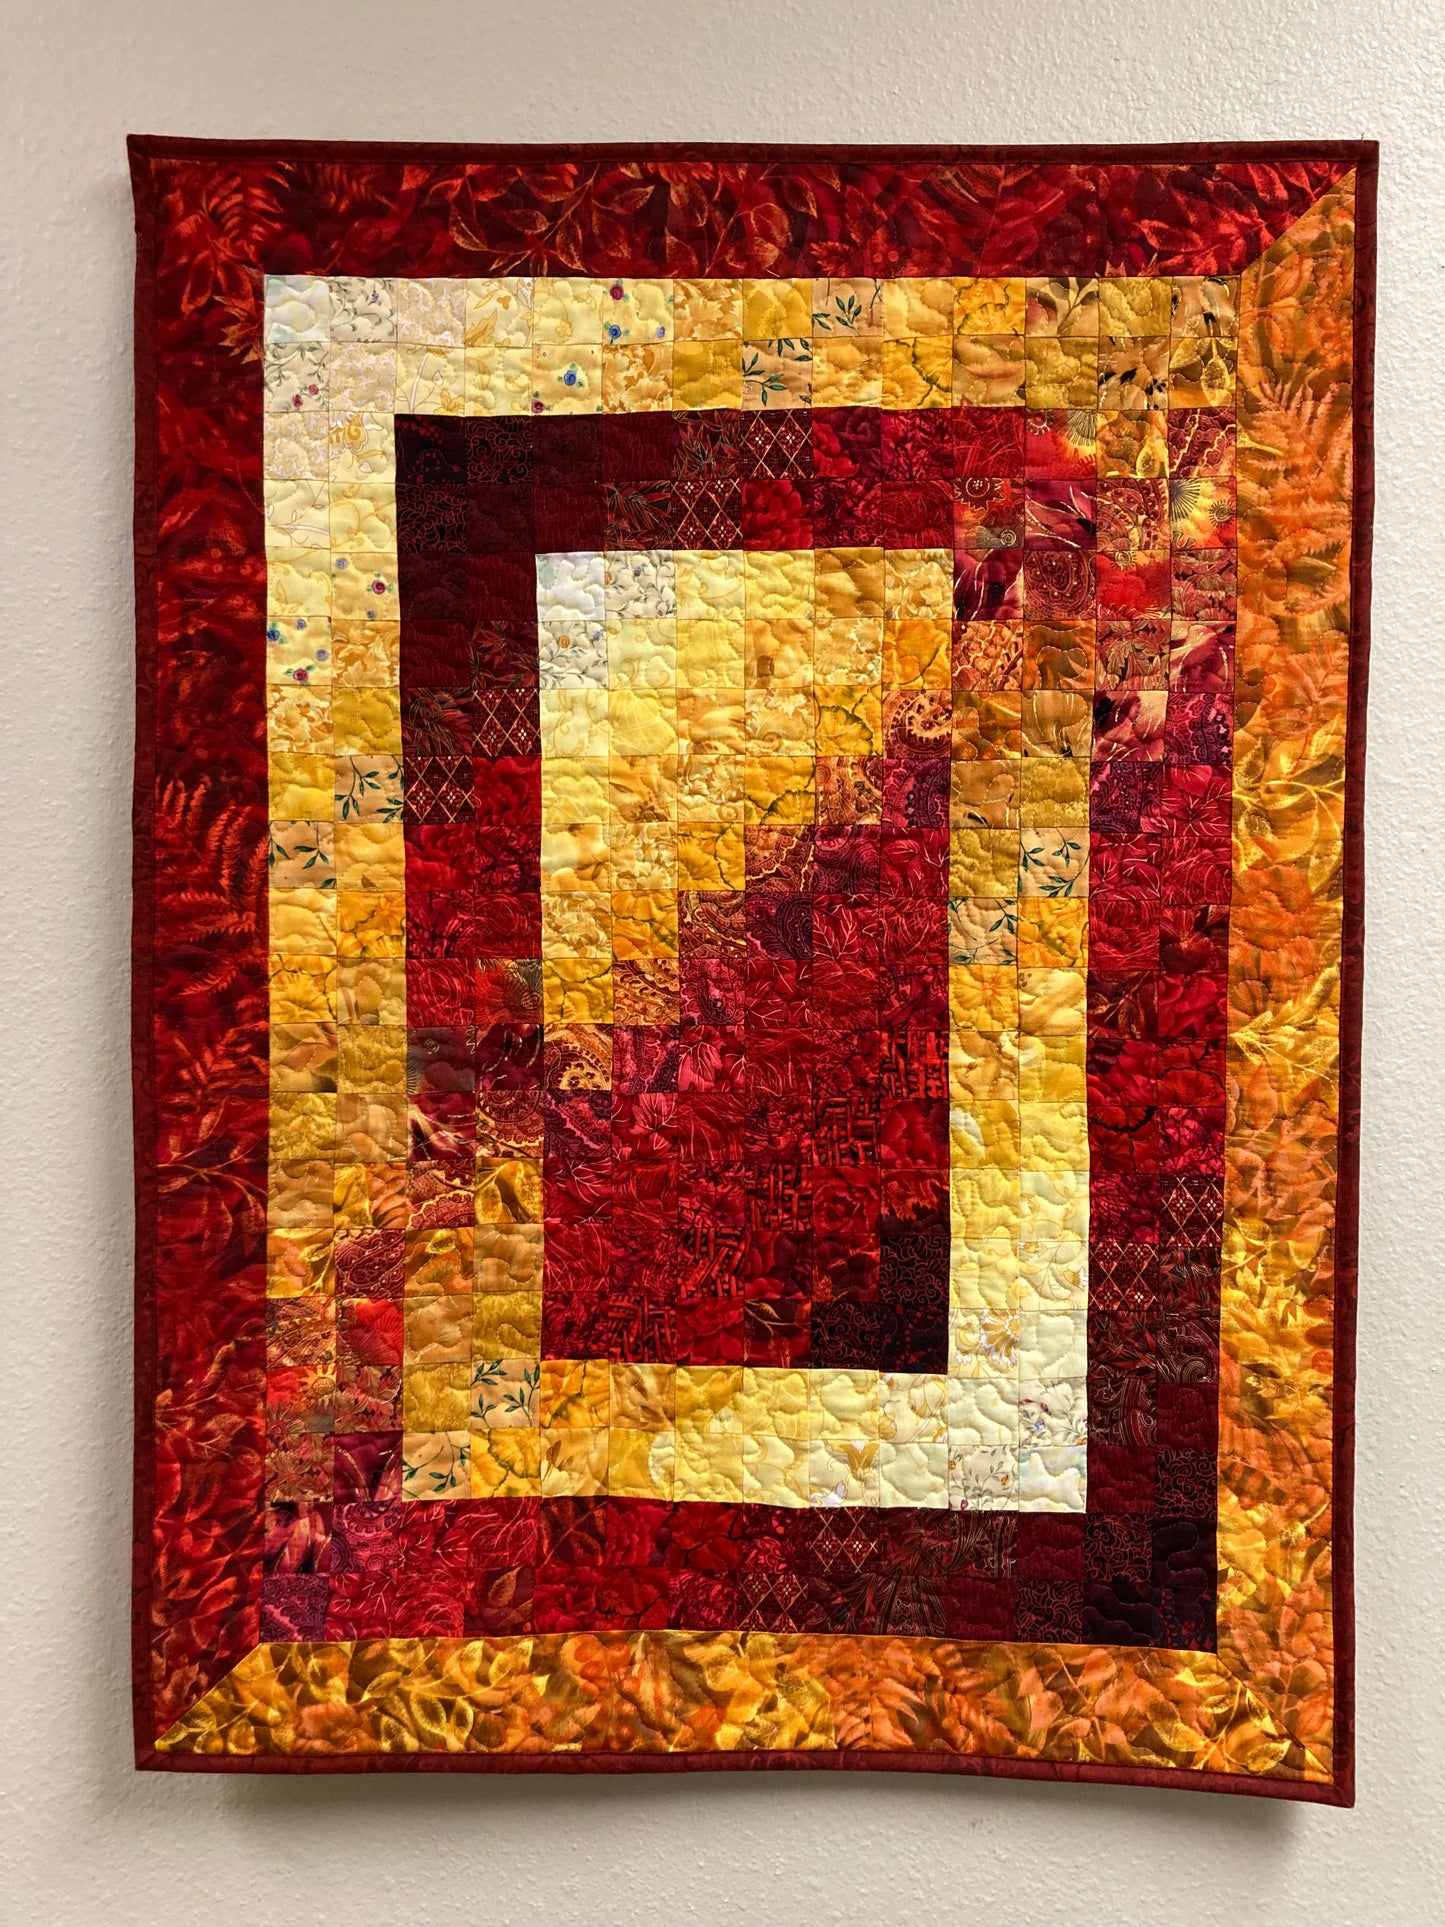 Art Quilt "Fire", Red Yellow Watercolor Fabric Wall Hanging Tapestry Original Abstract Artwork 26x35" Living Room Bedroom Handmade Vertical